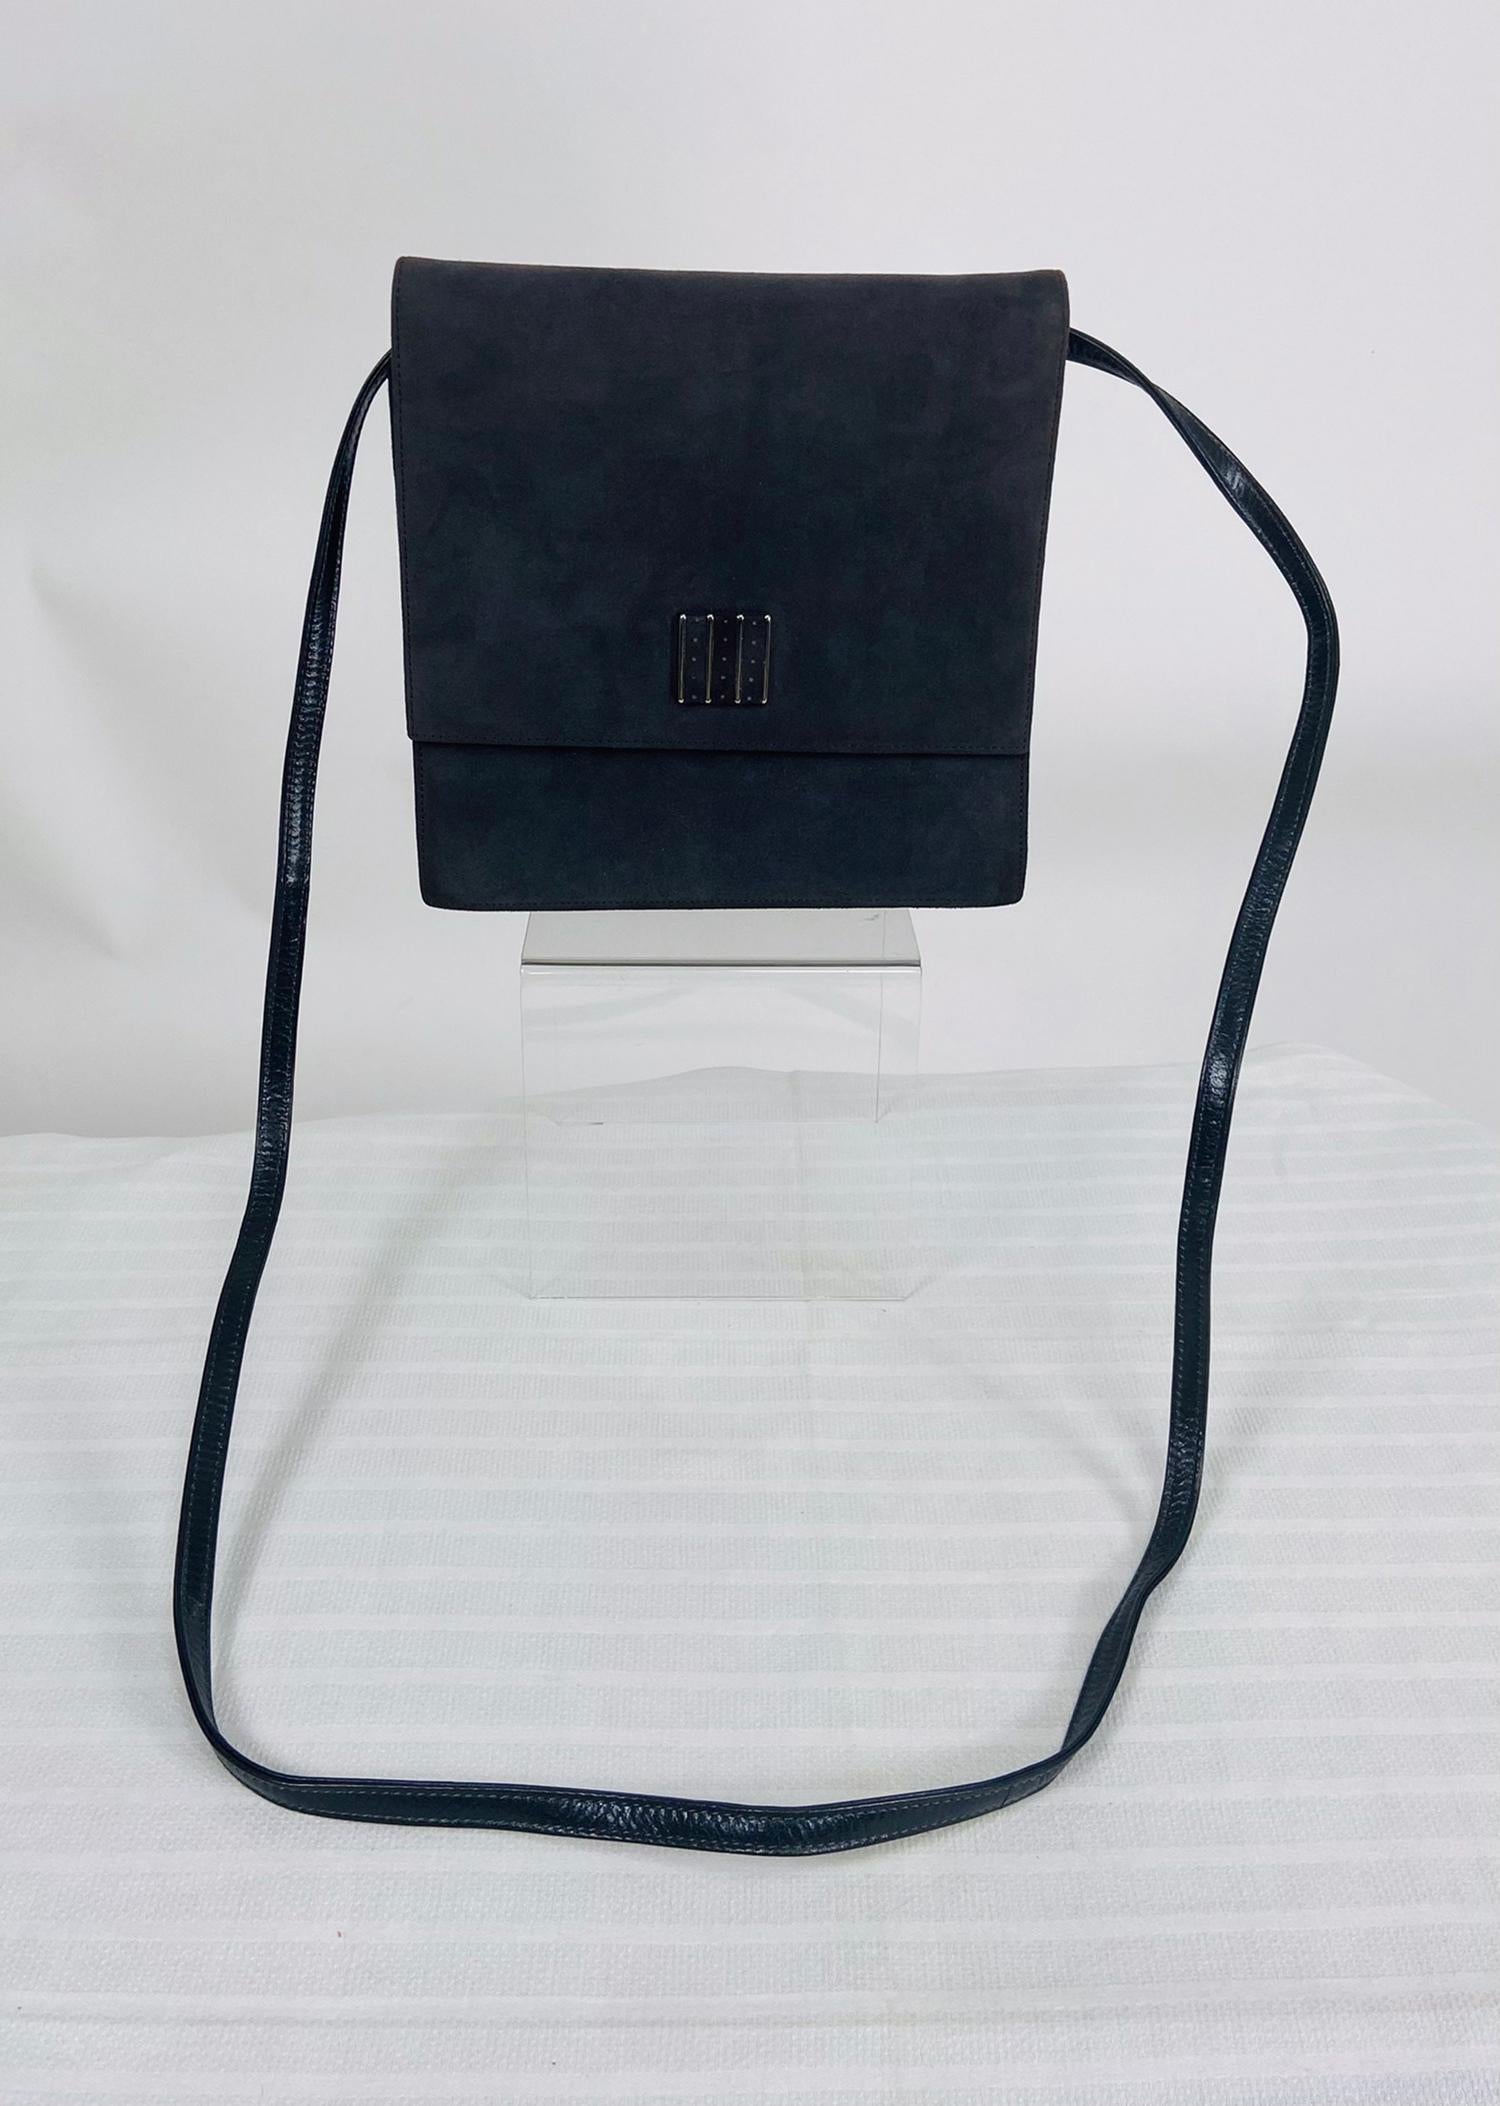 Women's or Men's Bruno Magli Grey Suede & Leather Flap Front Cross Body or Clutch Handbag For Sale